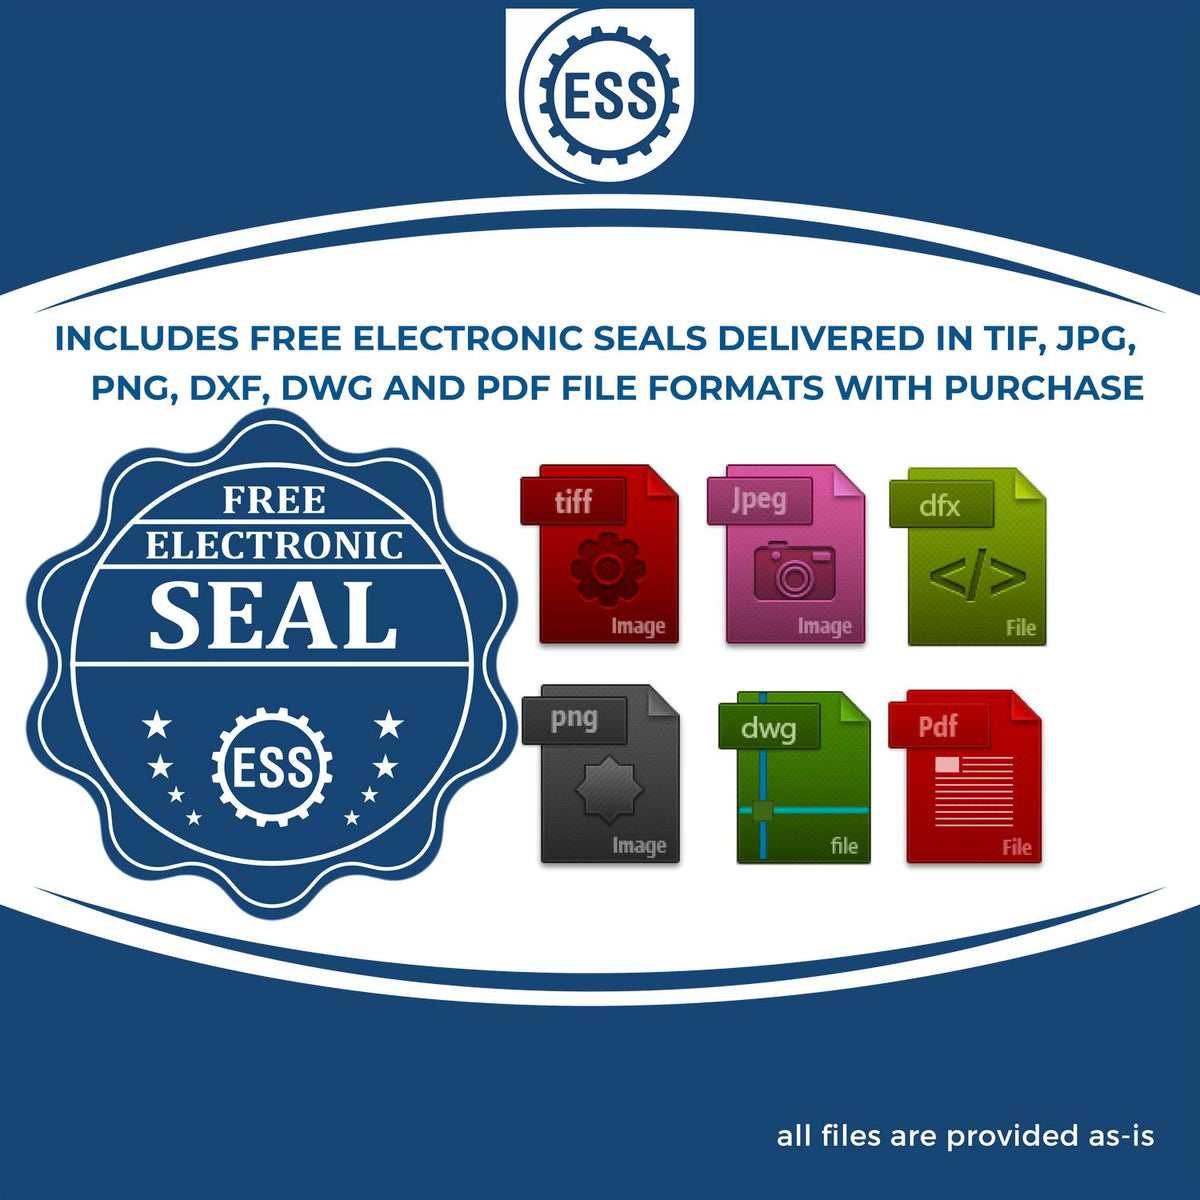 An infographic for the free electronic seal for the Premium MaxLight Pre-Inked Vermont Engineering Stamp illustrating the different file type icons such as DXF, DWG, TIF, JPG and PNG.